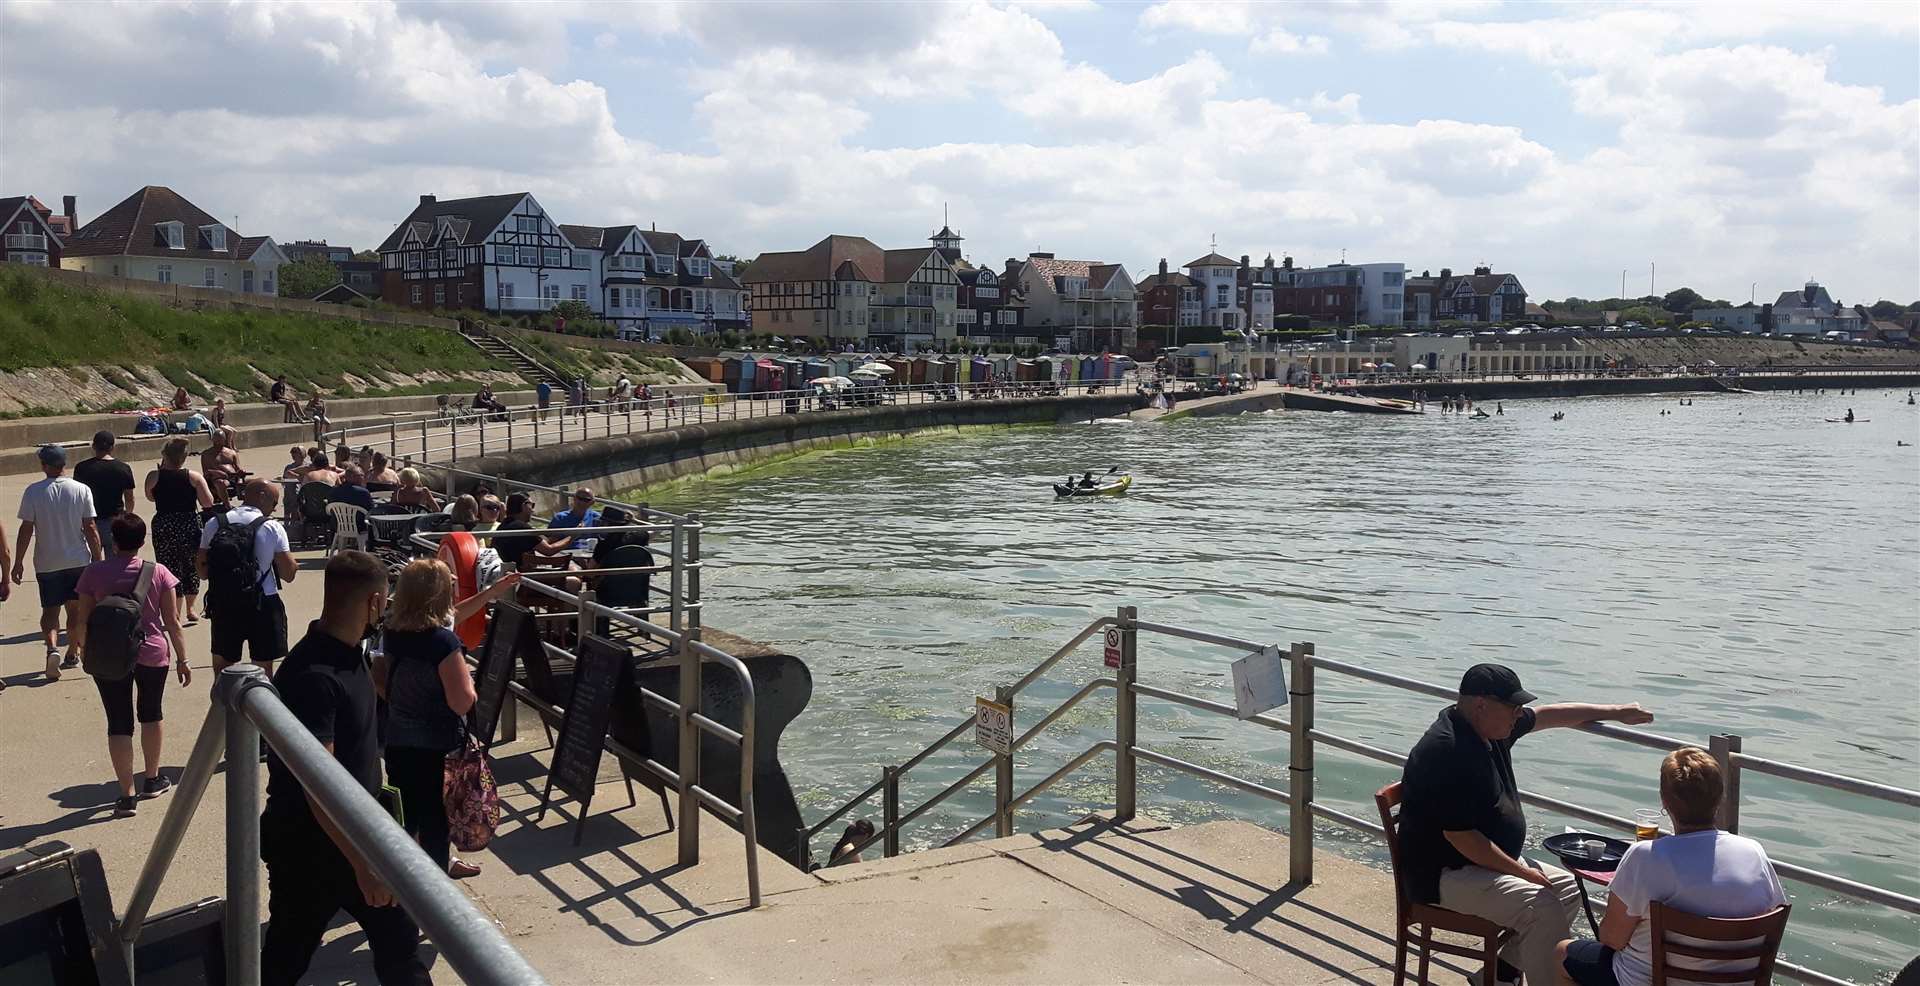 Westgate Bay, in Thanet, sees an influx of visitors on Saturday as Kent enjoys a sunny weekend